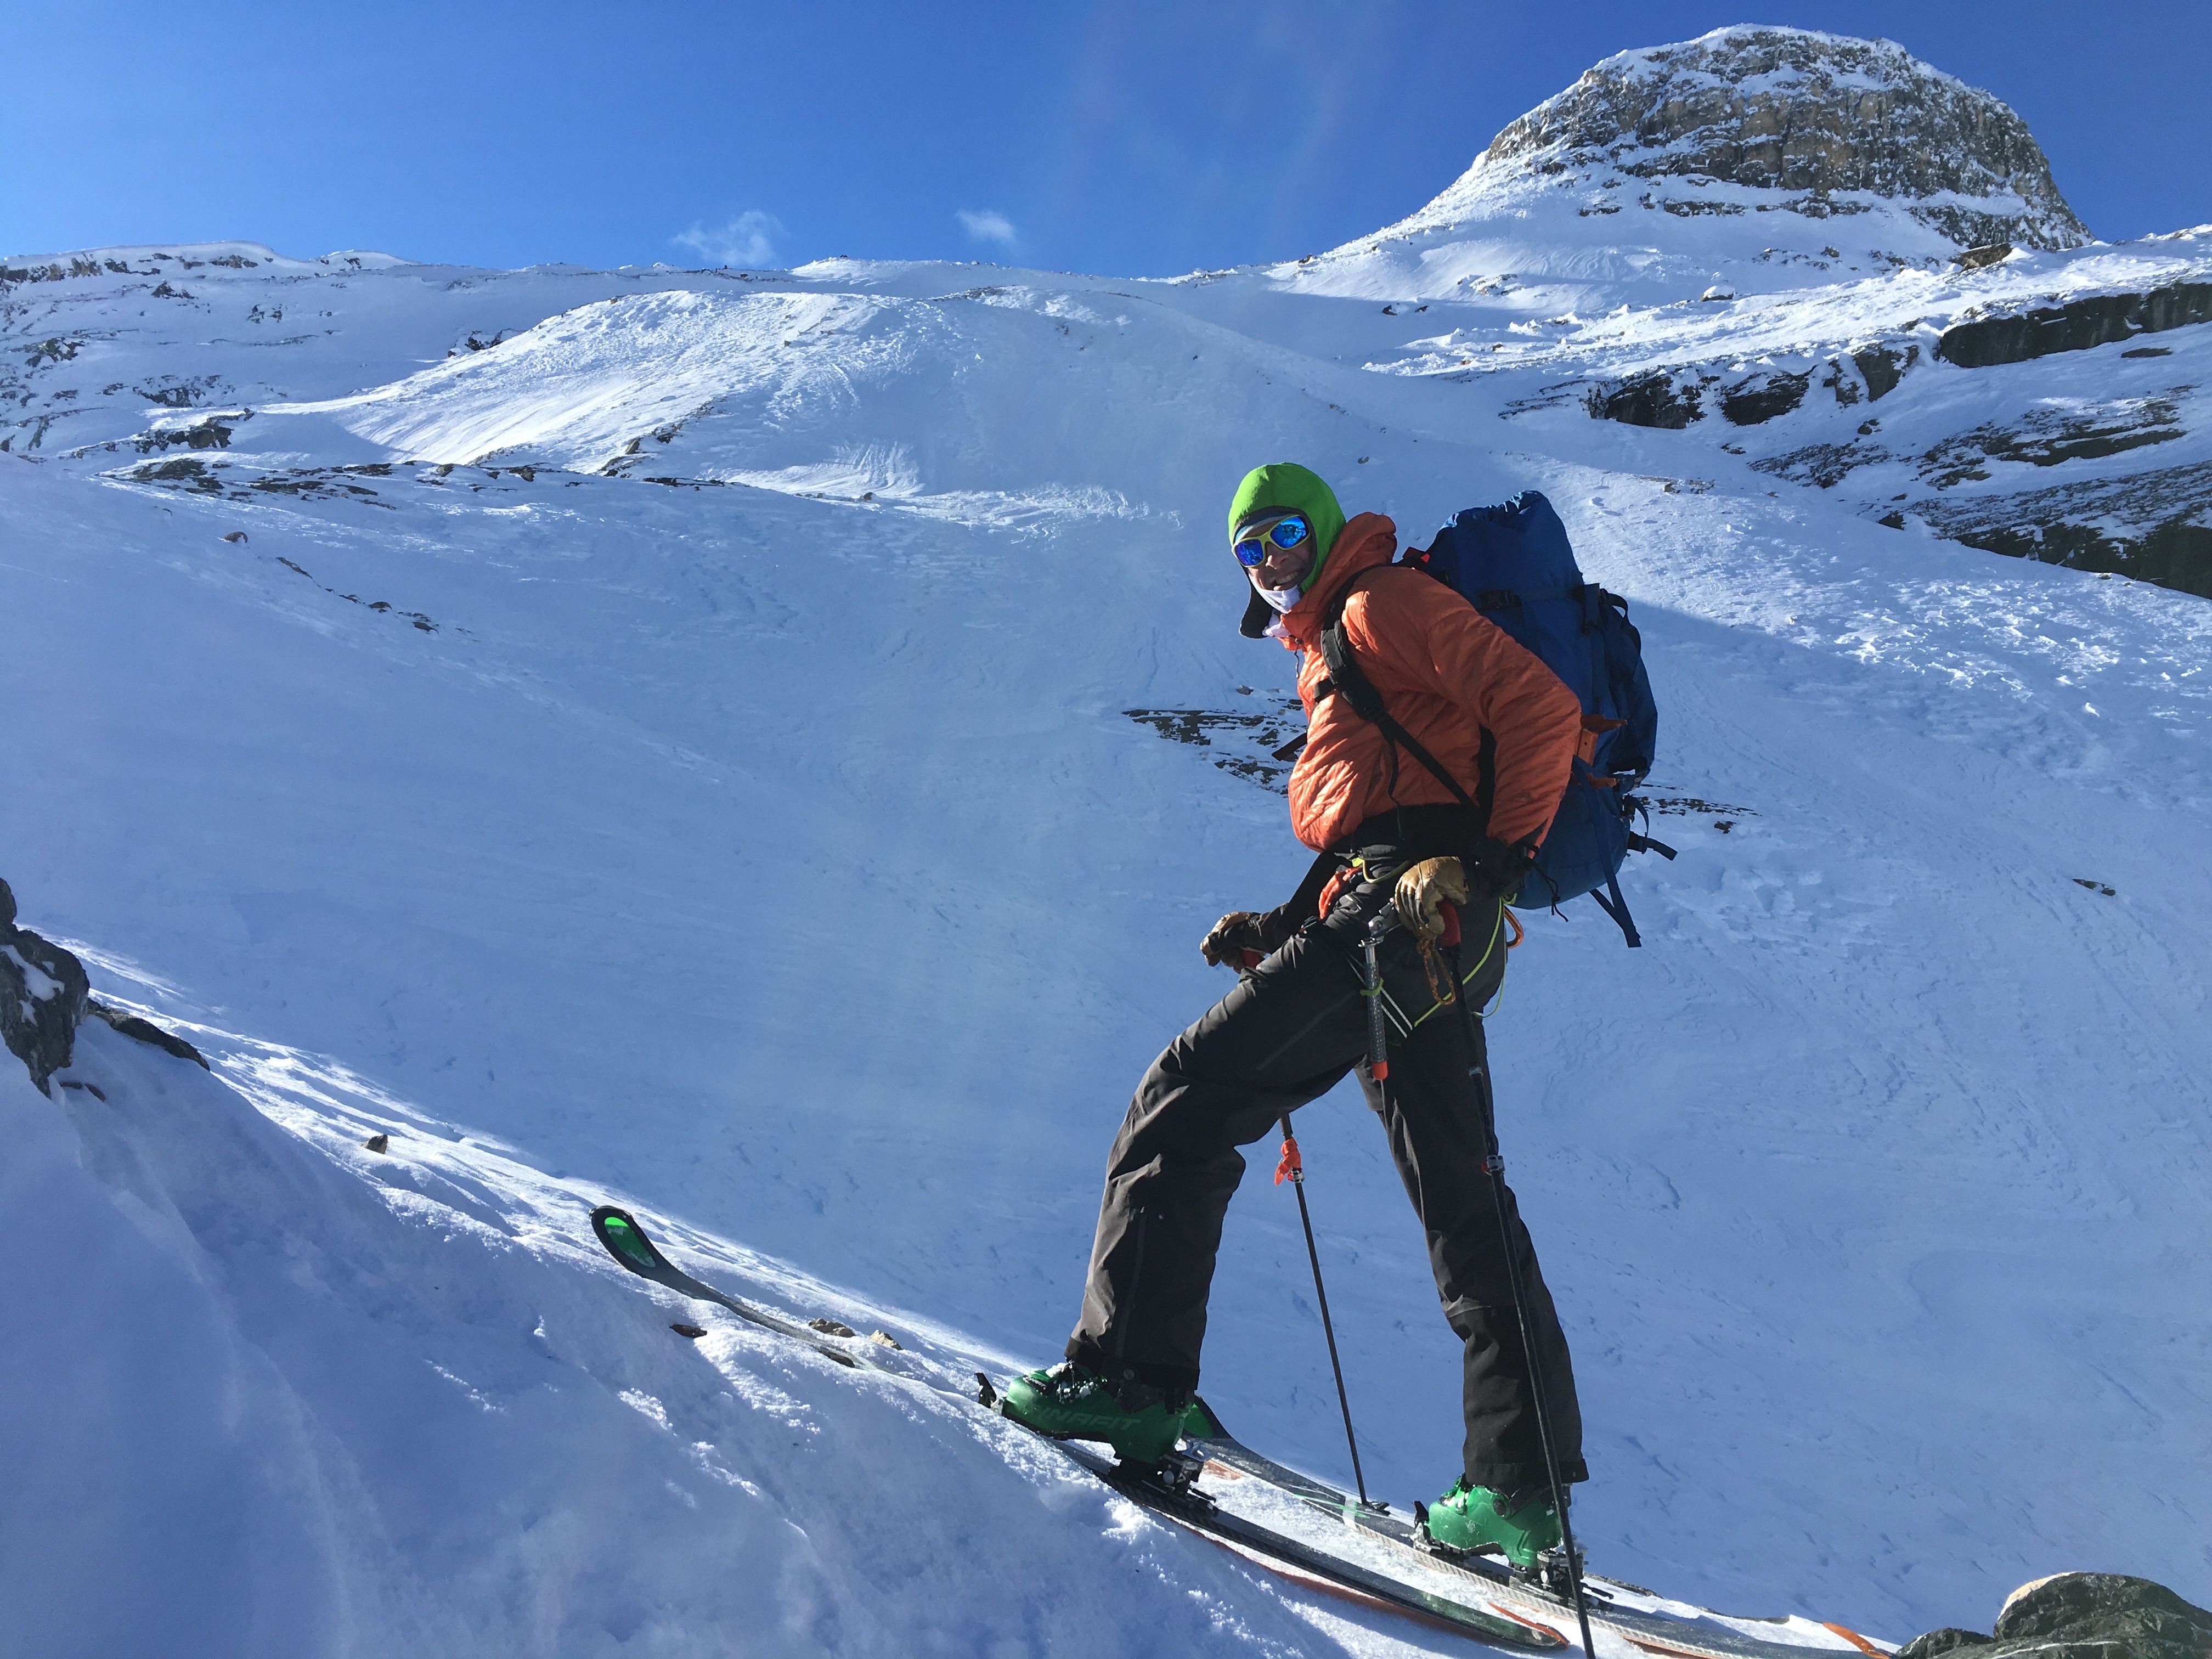 Mike Lewis takes a break in the Canadian Rockies while ski touring with the Yotei Pants. [Photo] Nick Lumby